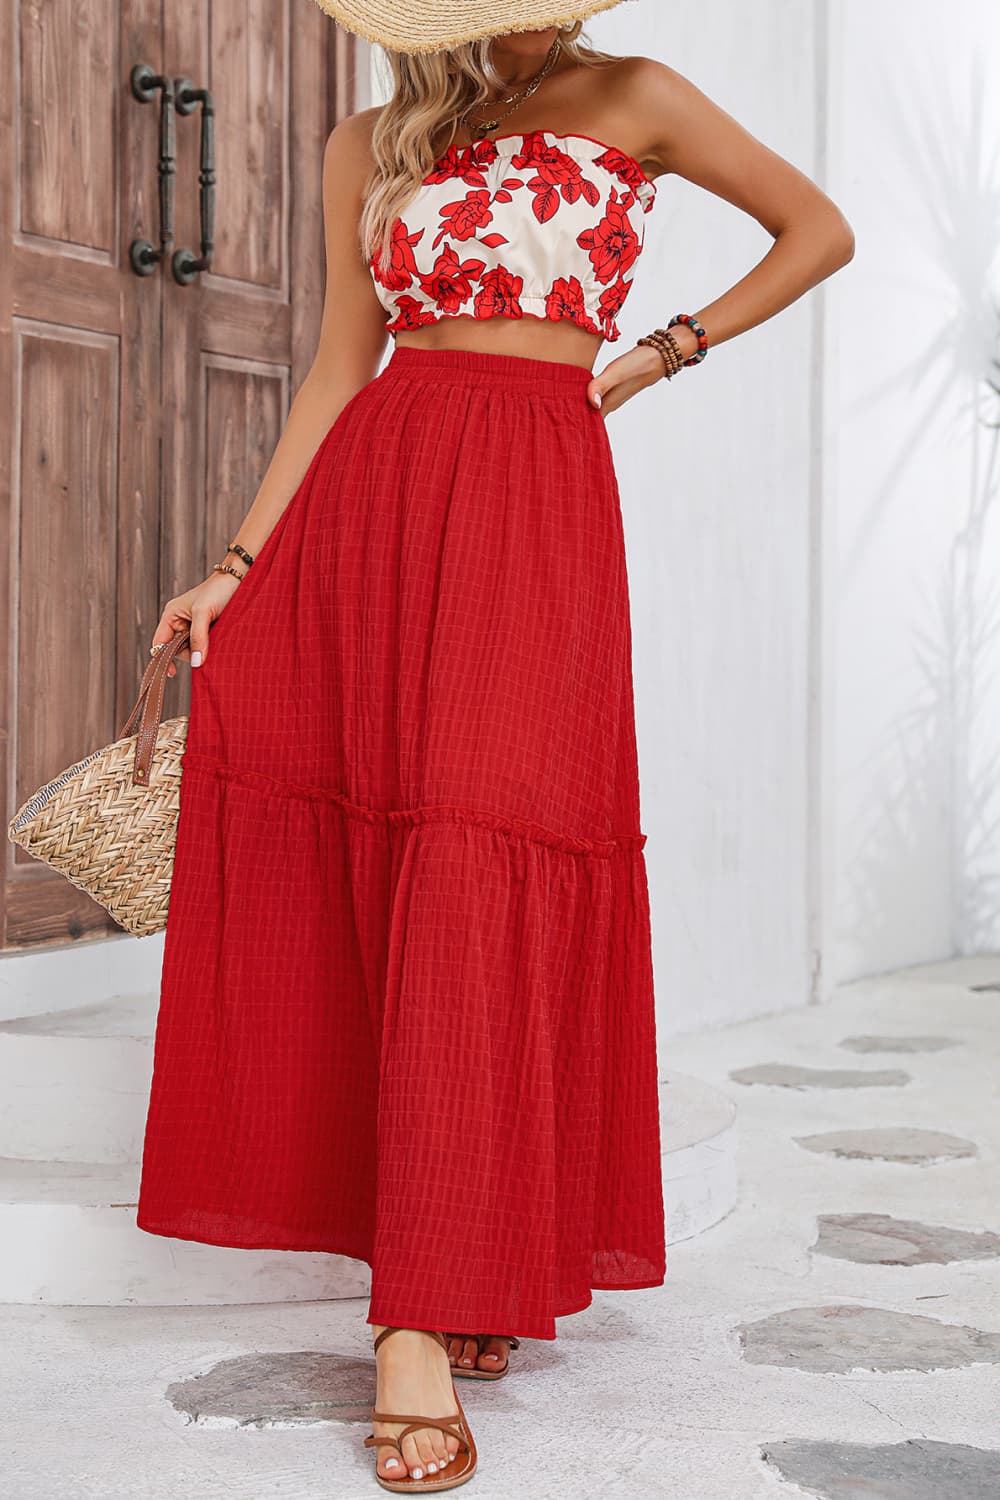 Floral Tube Top and Maxi Skirt Set - p9nstyle